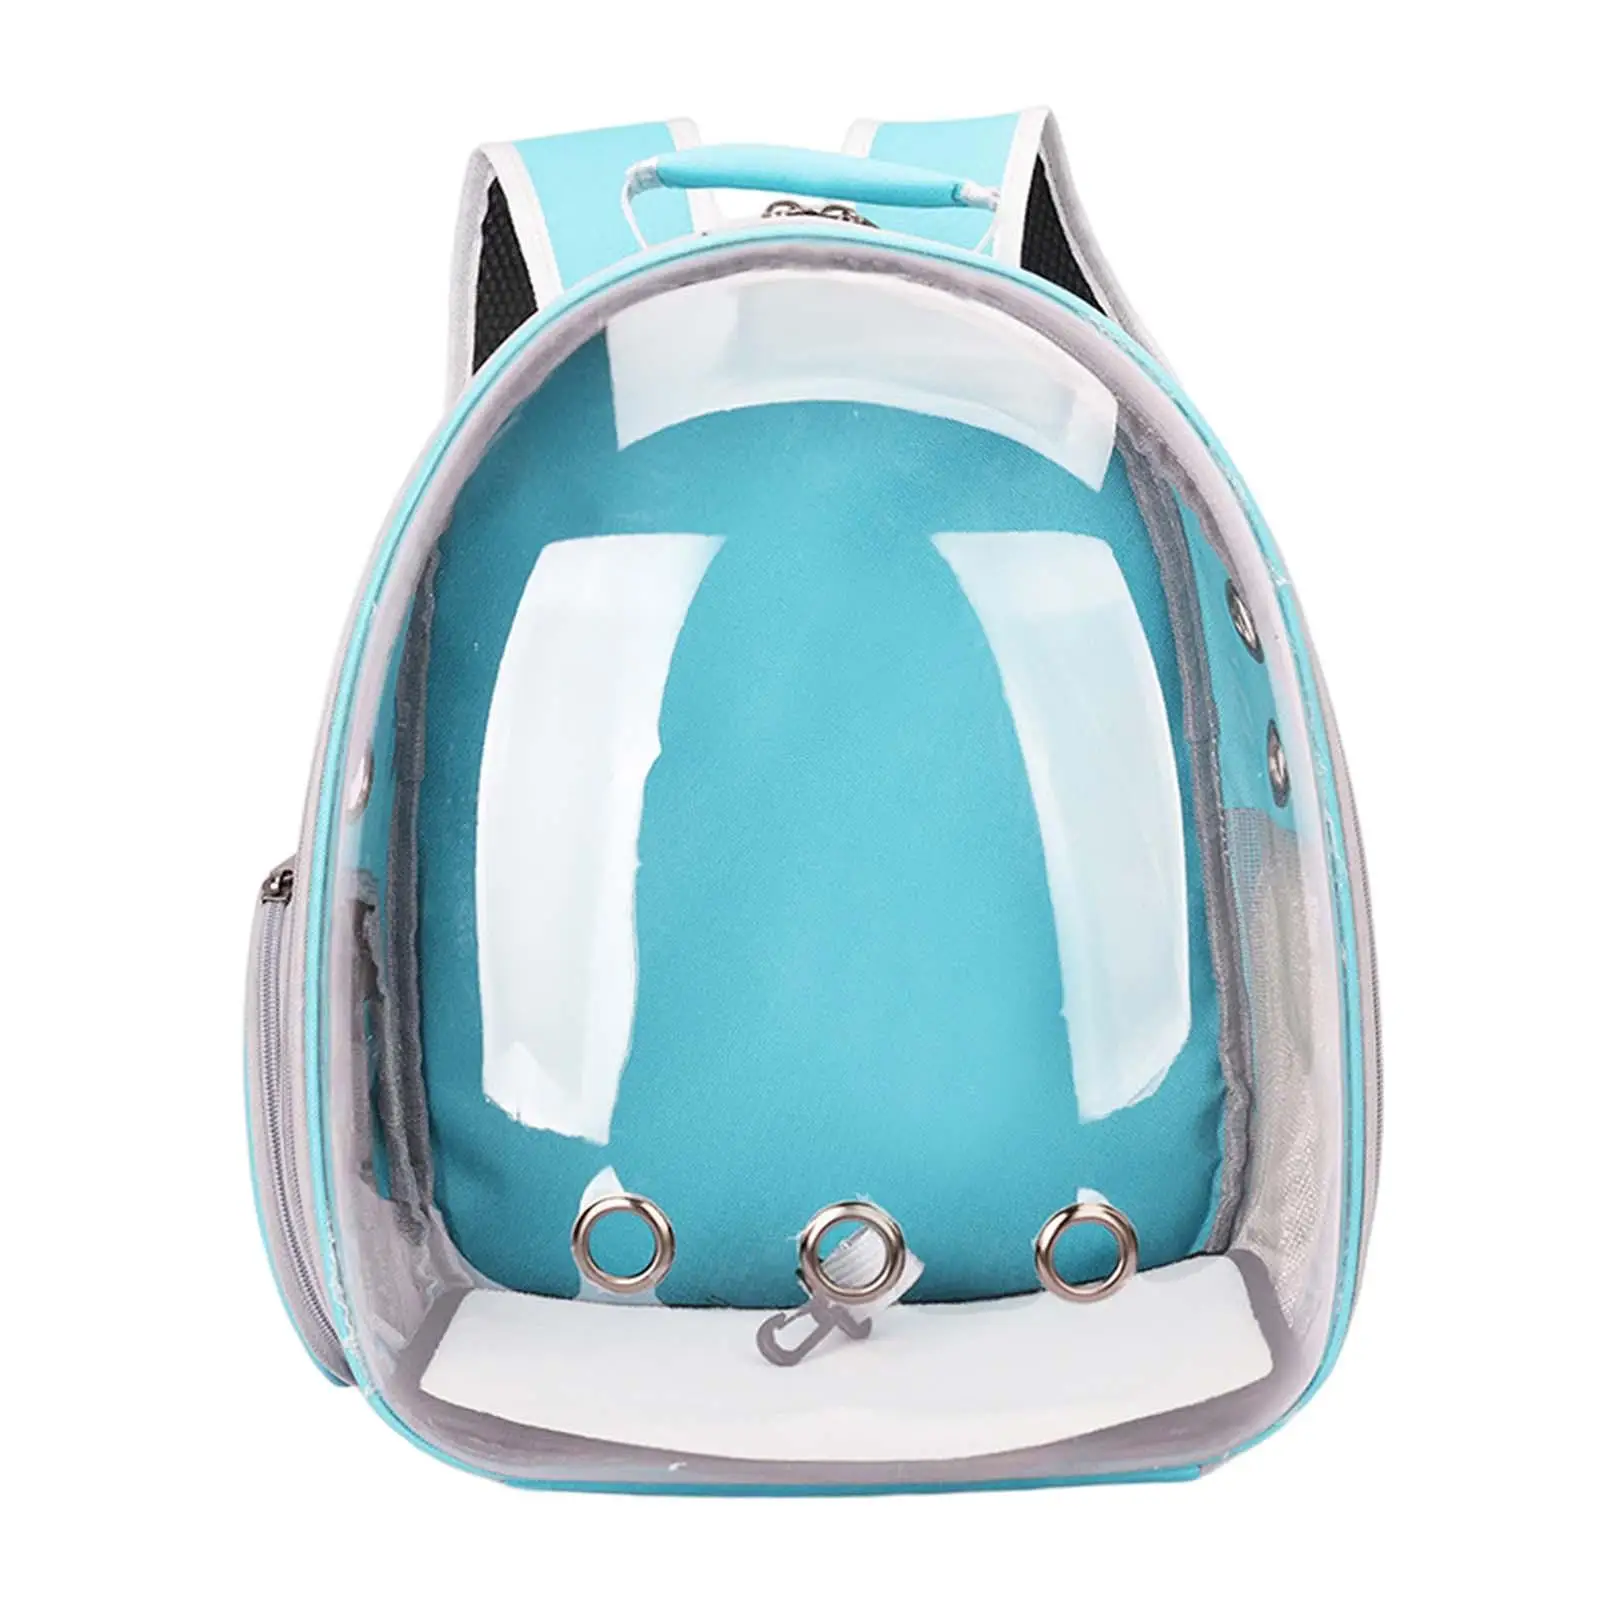 Pet Cat Carrier Backpack Ventilation Small Space Travel Bag Small Dog Backpack Carrier Pet Travel Bag for Hiking Outdoor Travel